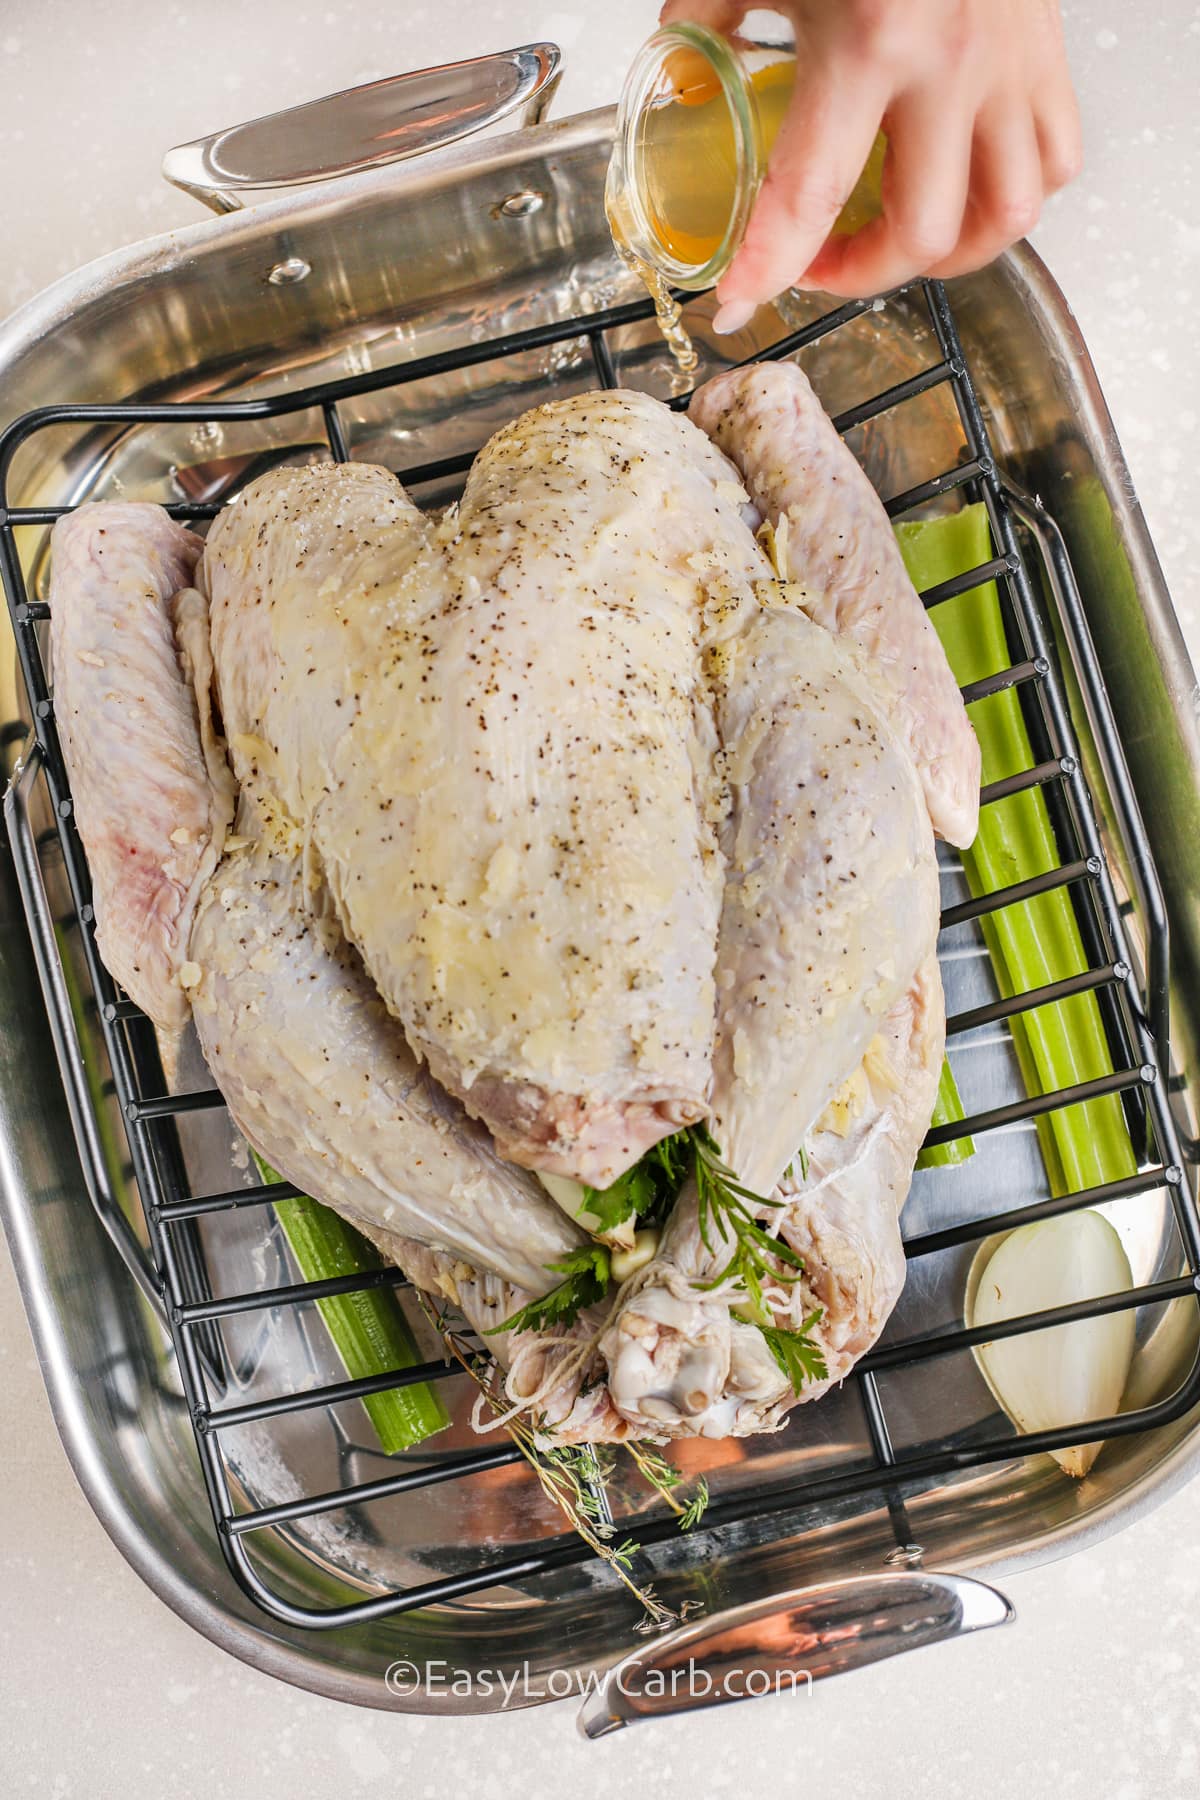 raw turkey with broth being poured on top in a roasting pan